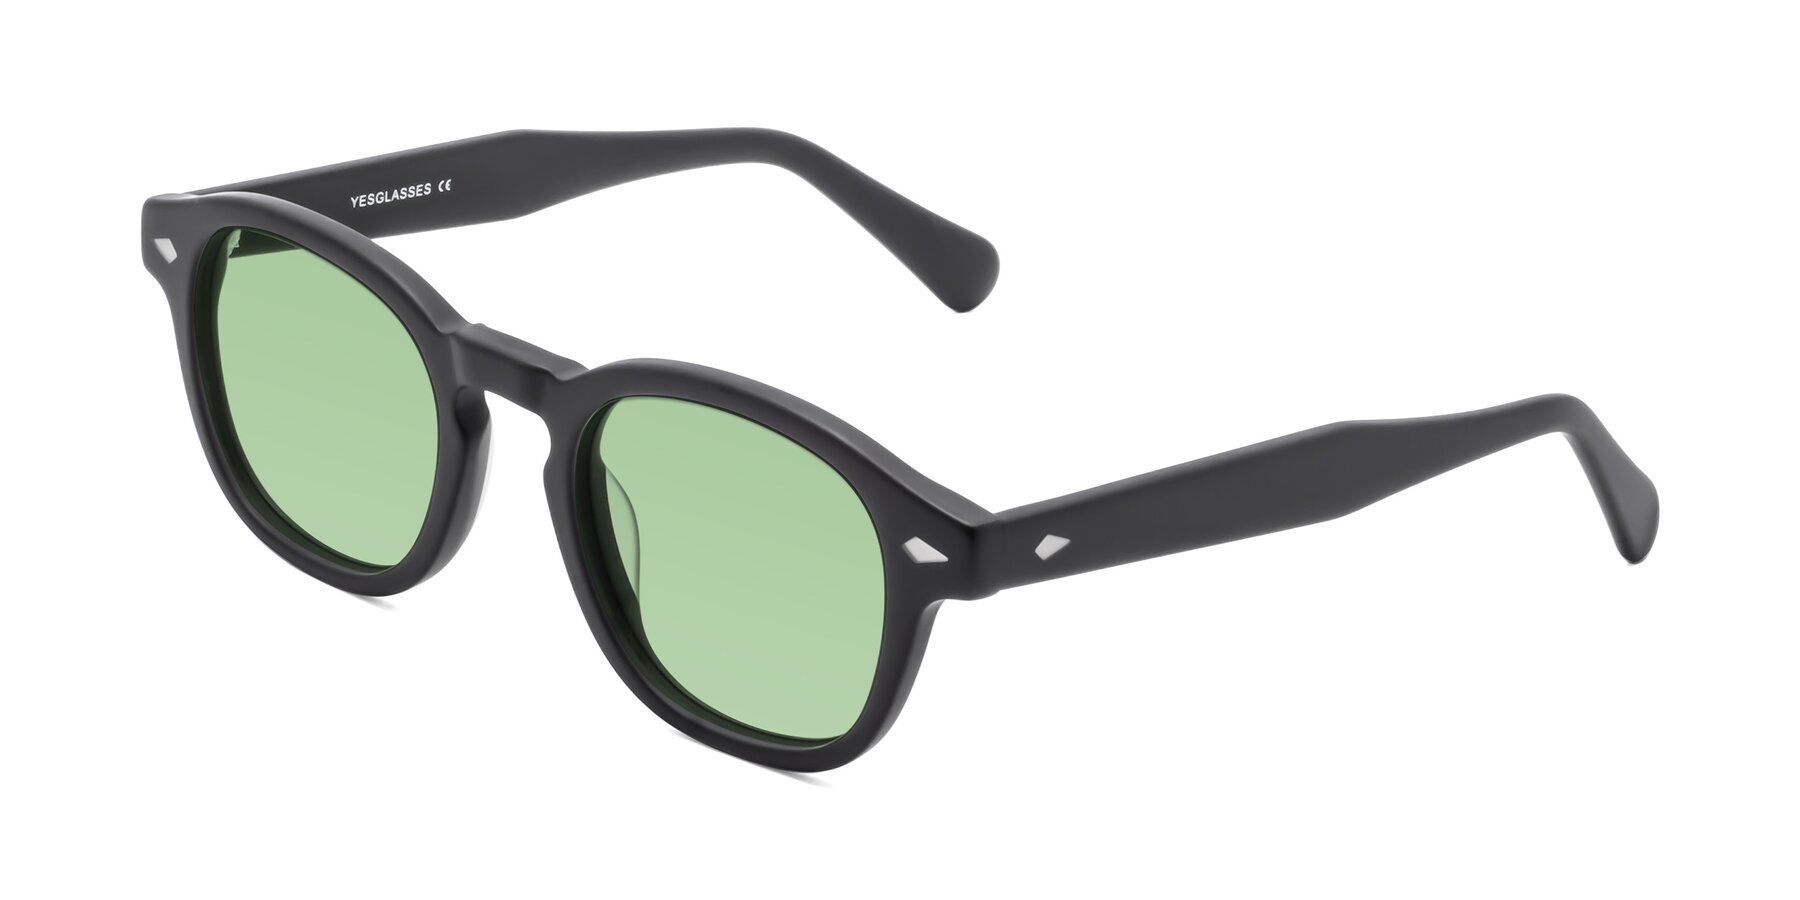 Angle of WALL-E in Matte Black with Medium Green Tinted Lenses